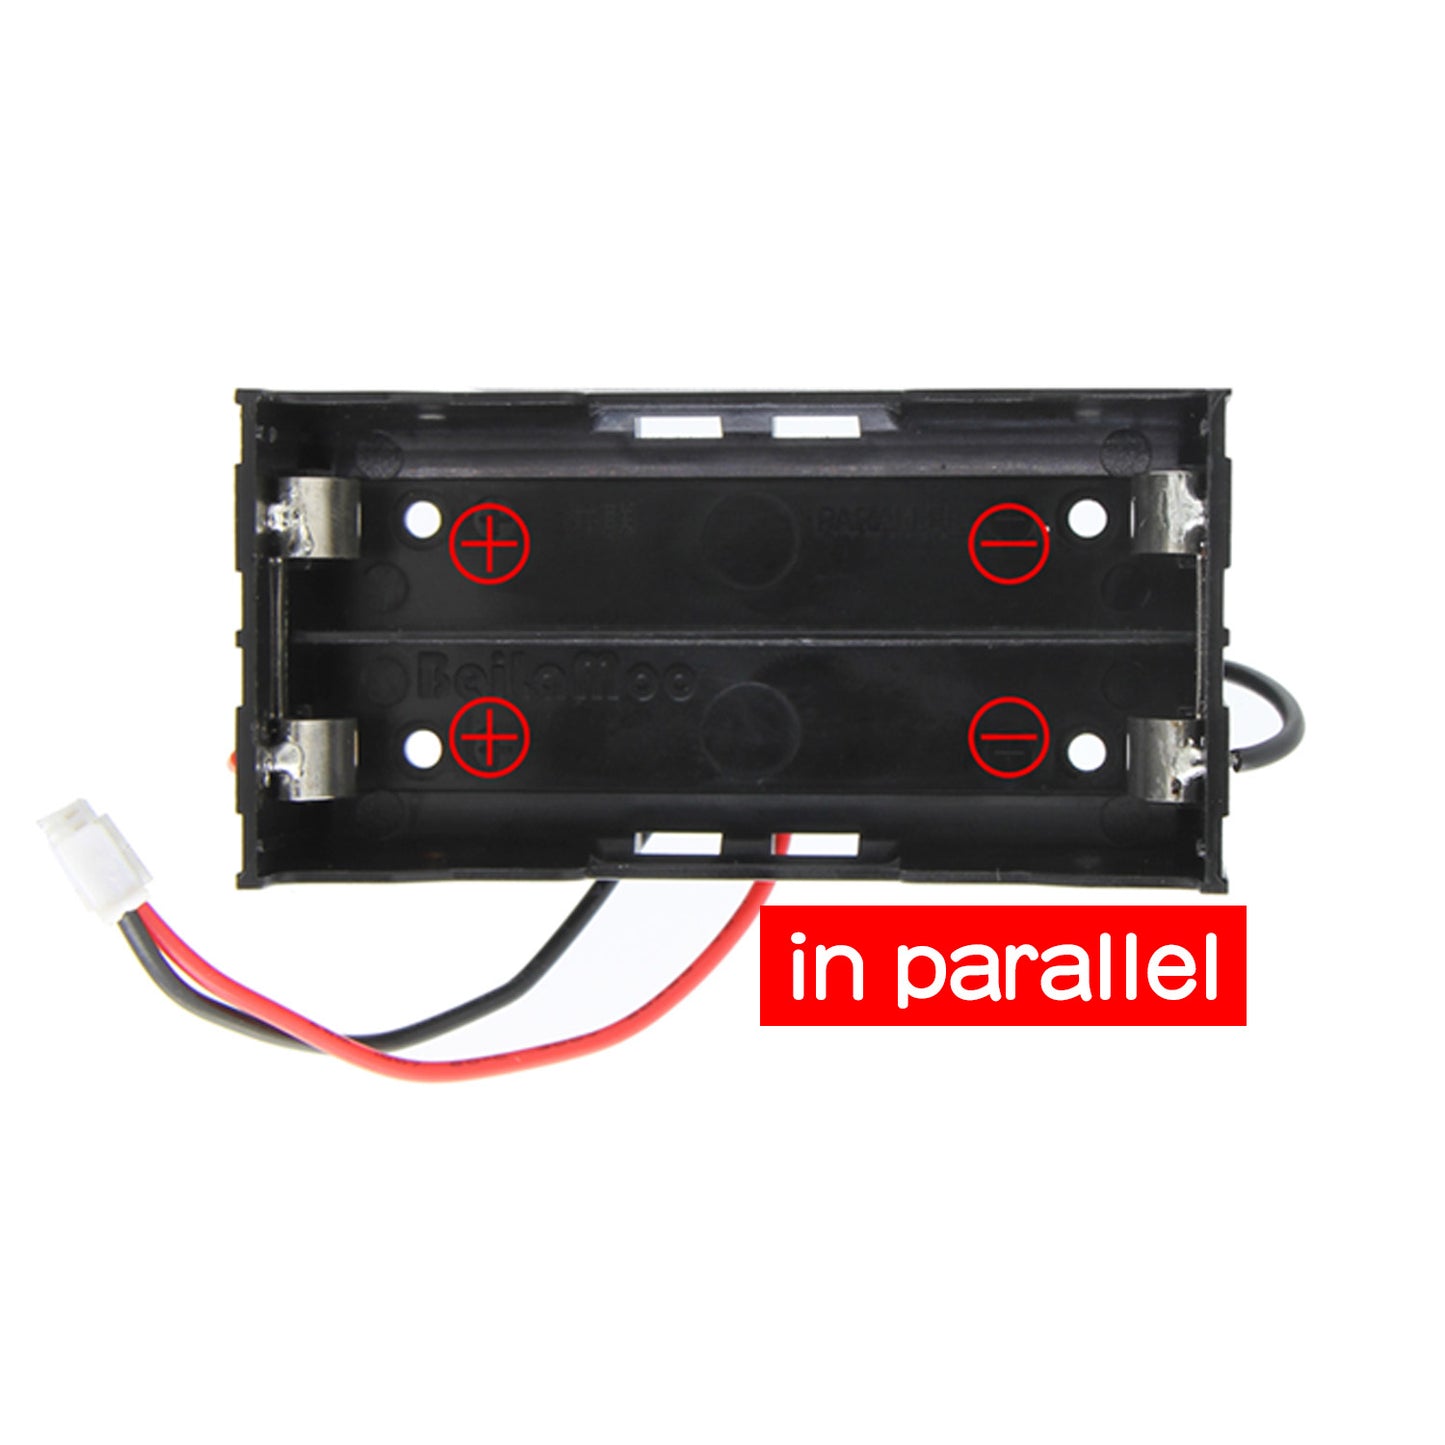 2 Pack 2-way parallel 18650 battery pack with XH2.54 terminals head